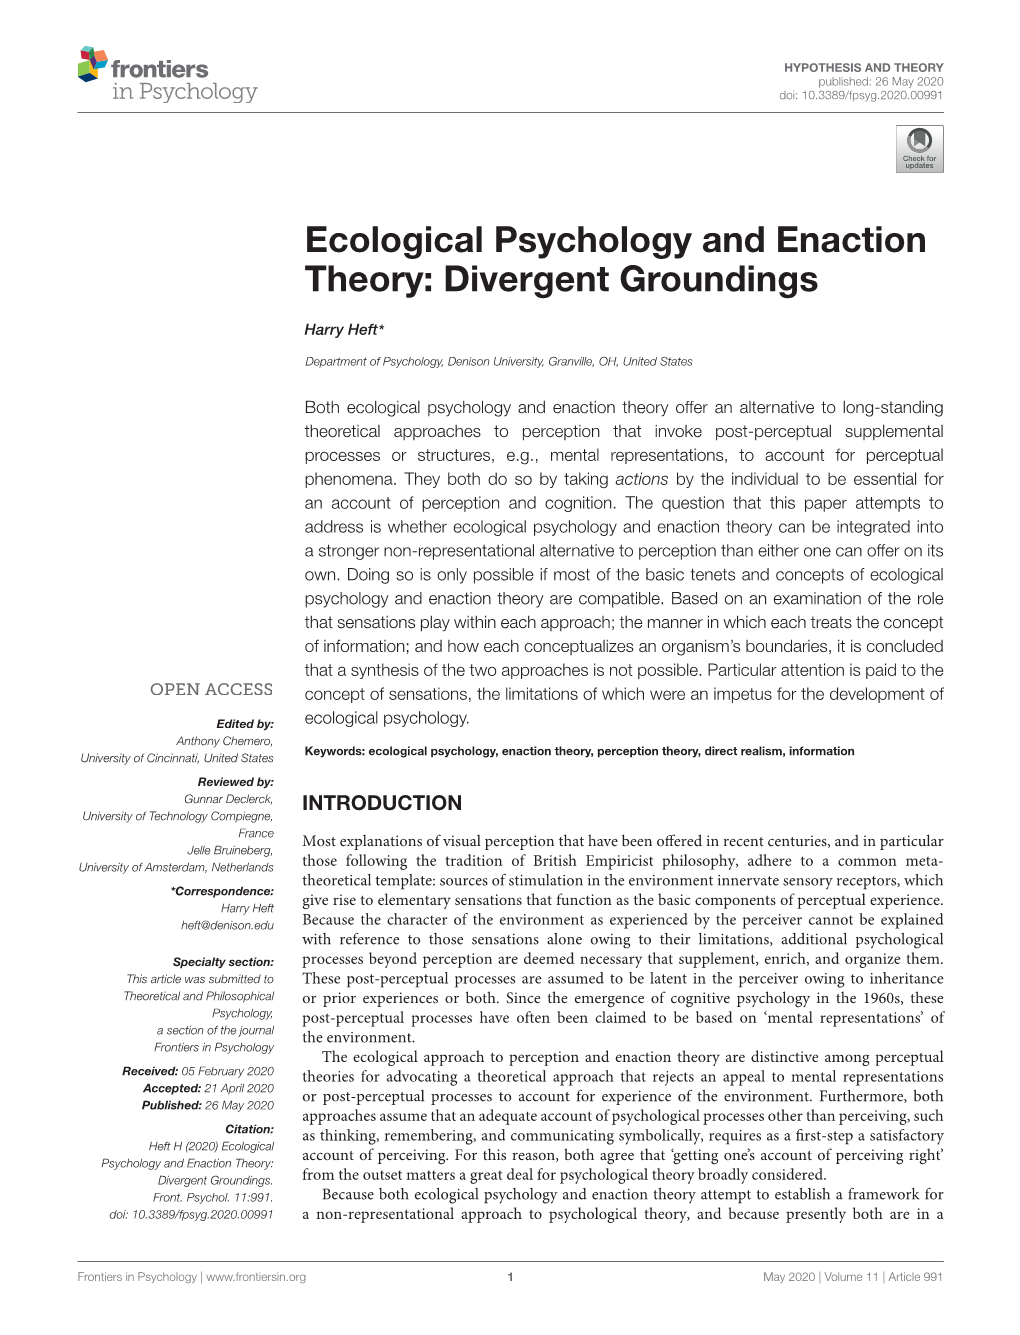 Ecological Psychology and Enaction Theory: Divergent Groundings